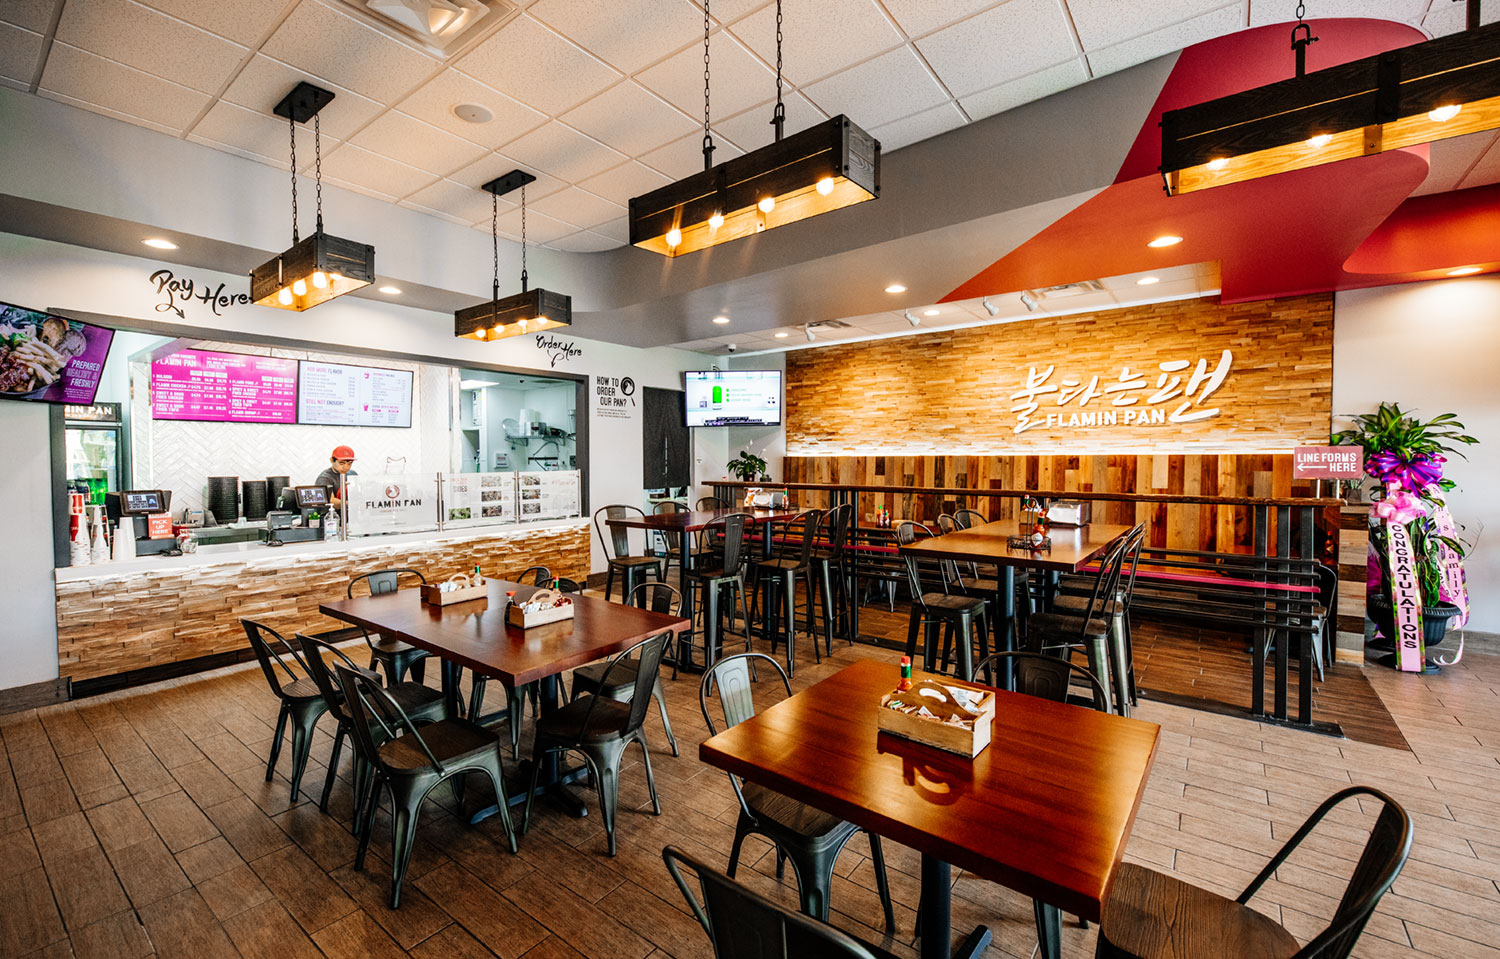 Flamin Pan's interior is modern and bright